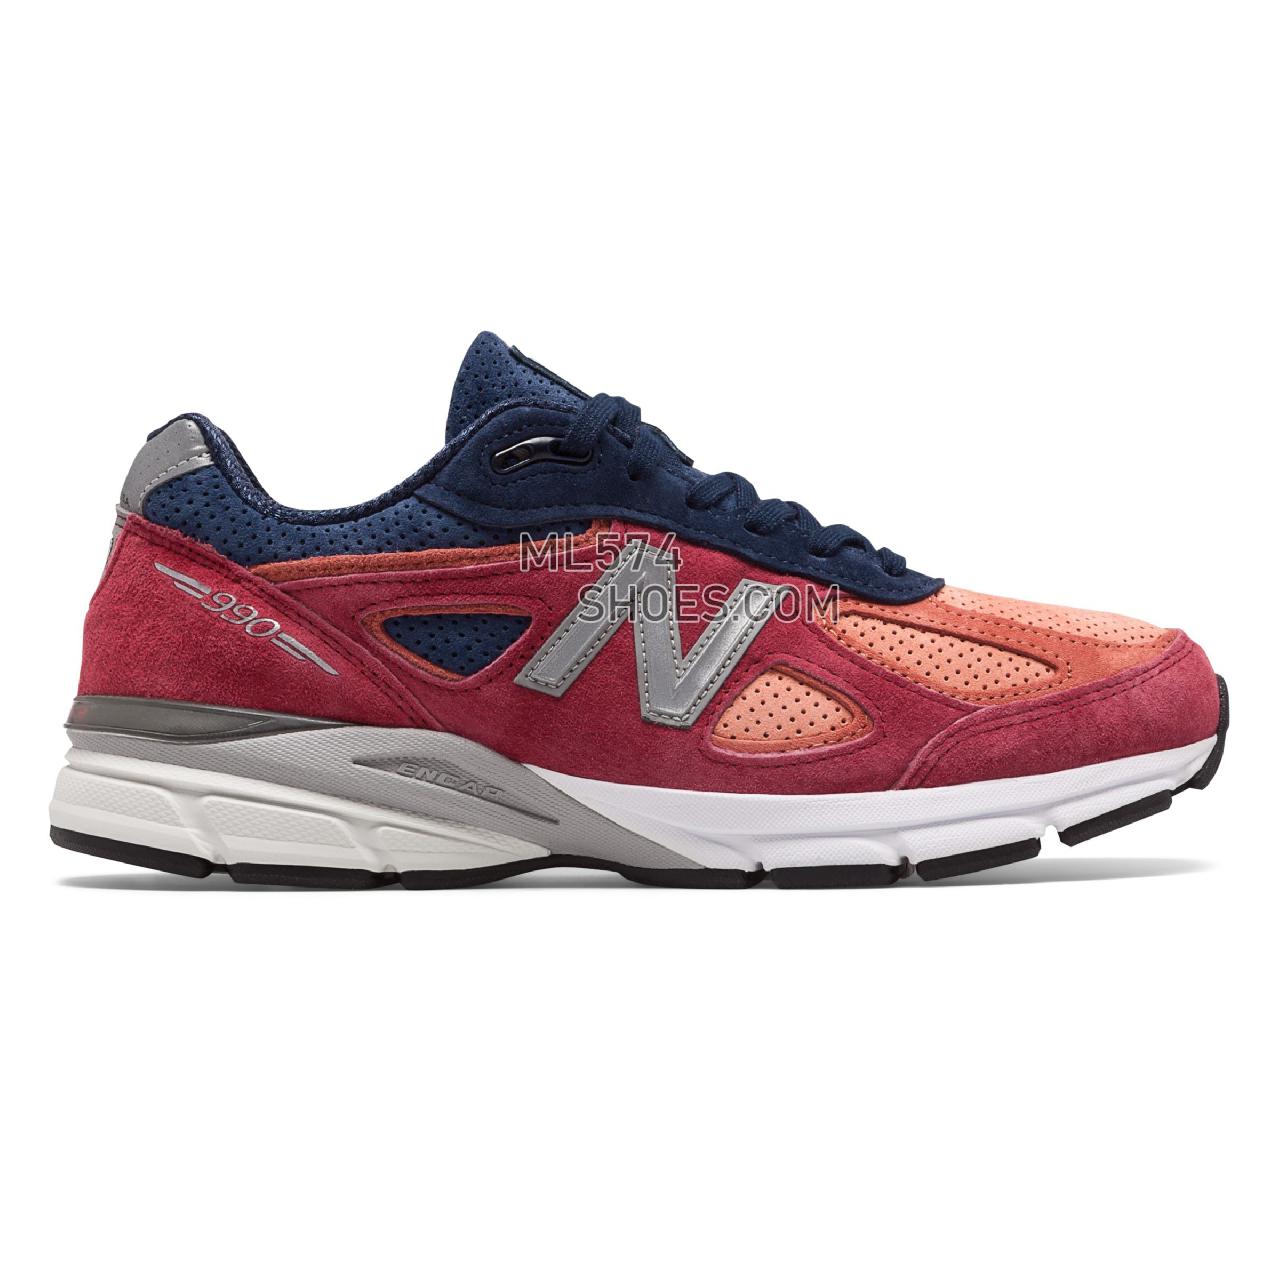 New Balance 990v4 - Men's 990 - Running Copper Rose with Pigment - M990CP4